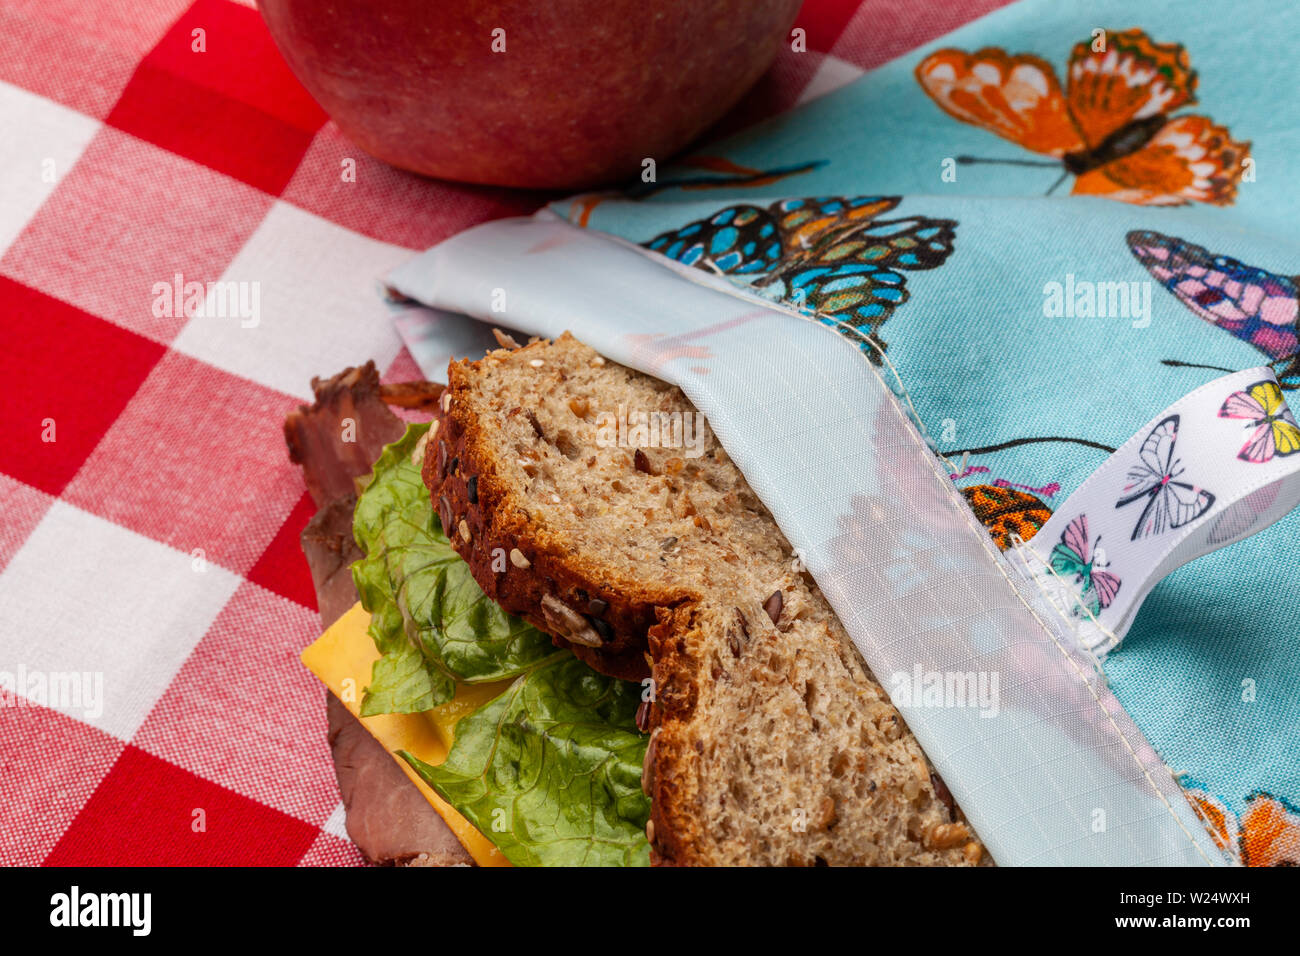 https://c8.alamy.com/comp/W24WXH/an-apple-and-a-sandwich-in-a-environmentally-friendly-homemade-reusable-blue-butterfly-sandwich-bag-sitting-on-a-red-and-white-checkered-tablecloth-W24WXH.jpg